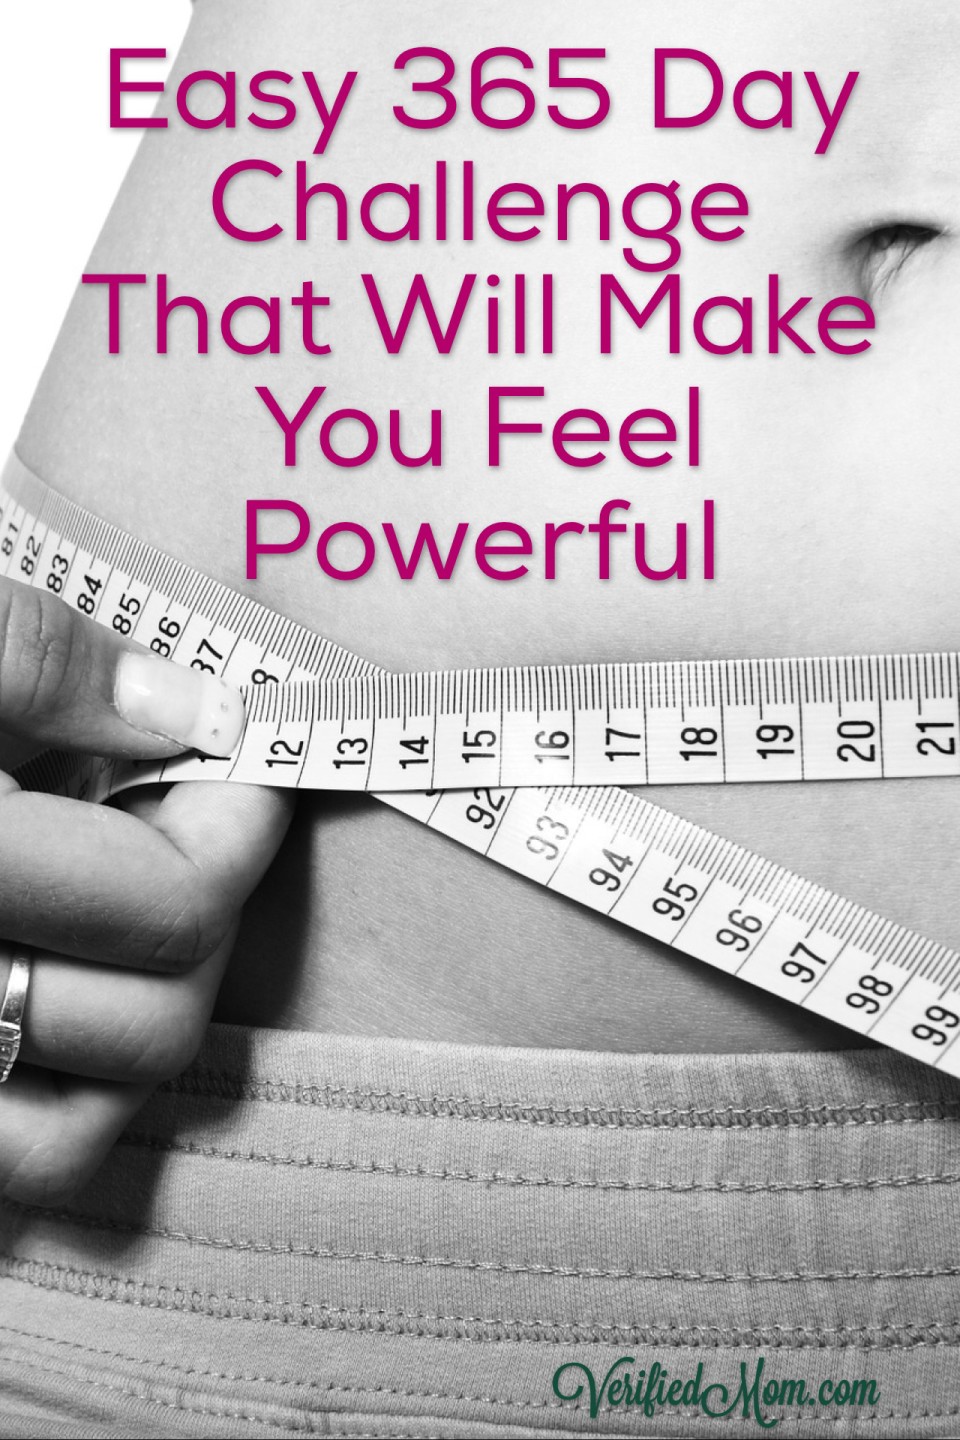 Easy 365 Day Challenge That Will Make You Feel Powerful -Pin